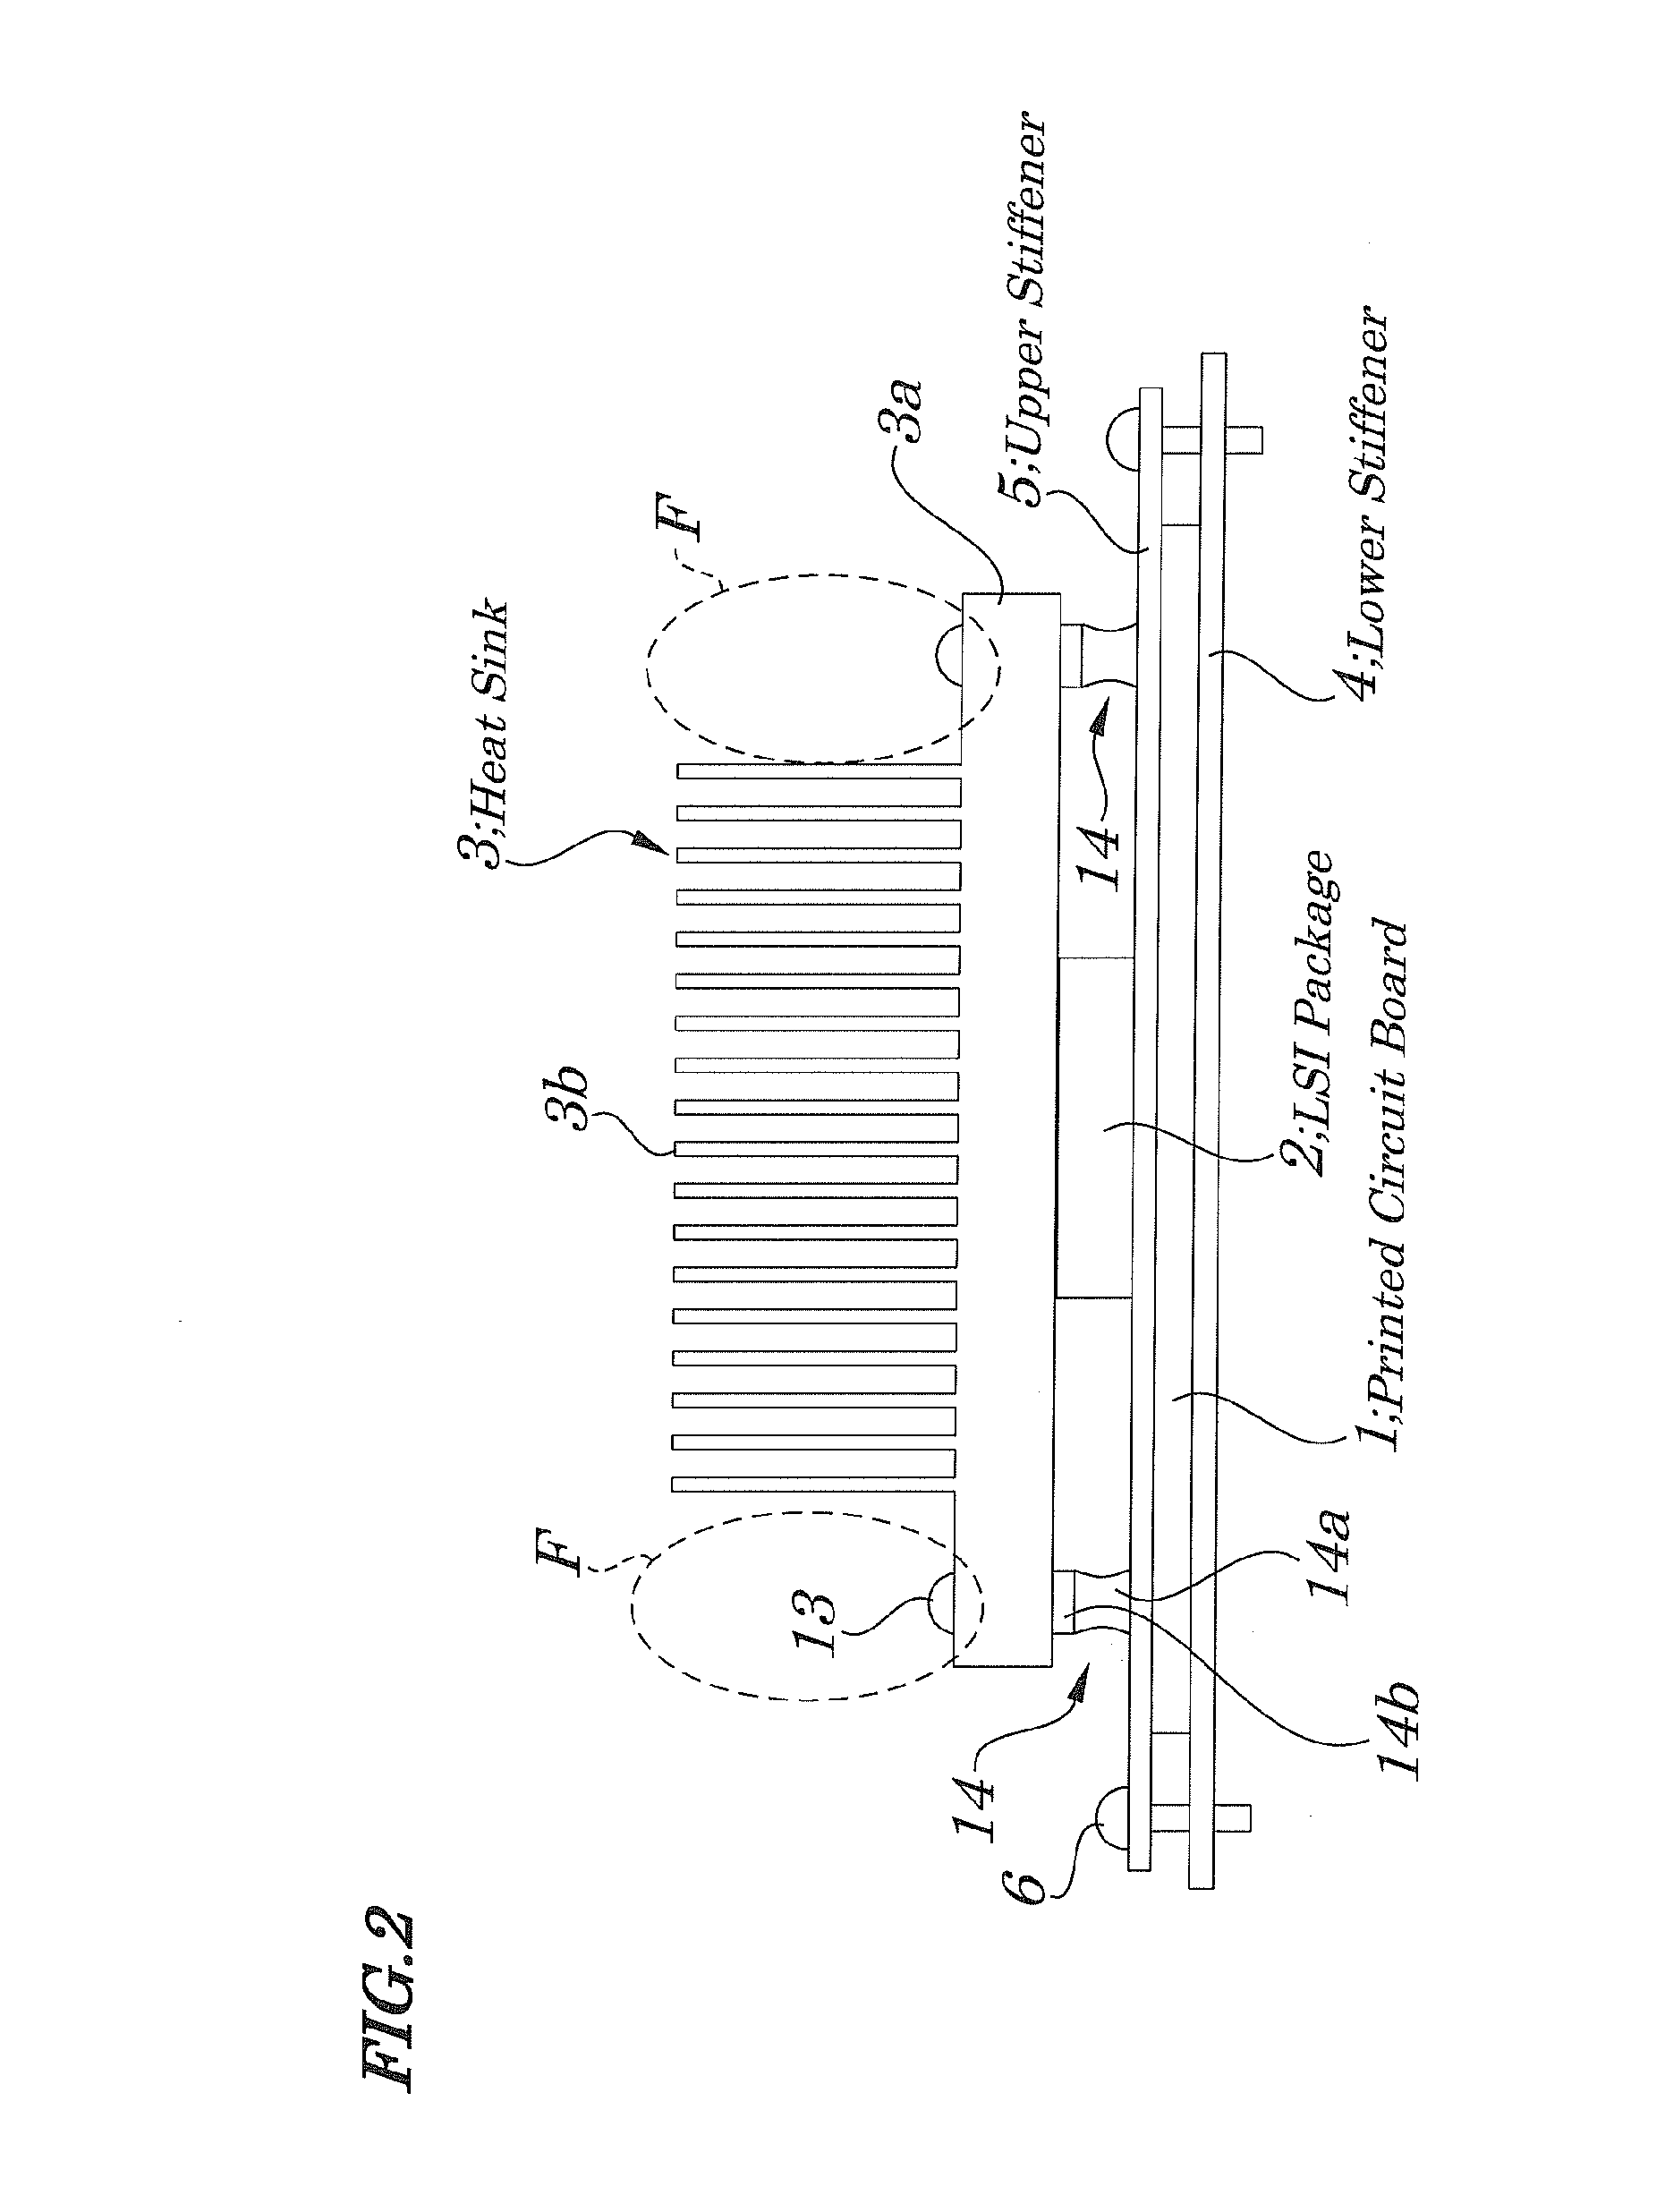 Mounting structure with heat sink for electronic component and female securing member for same